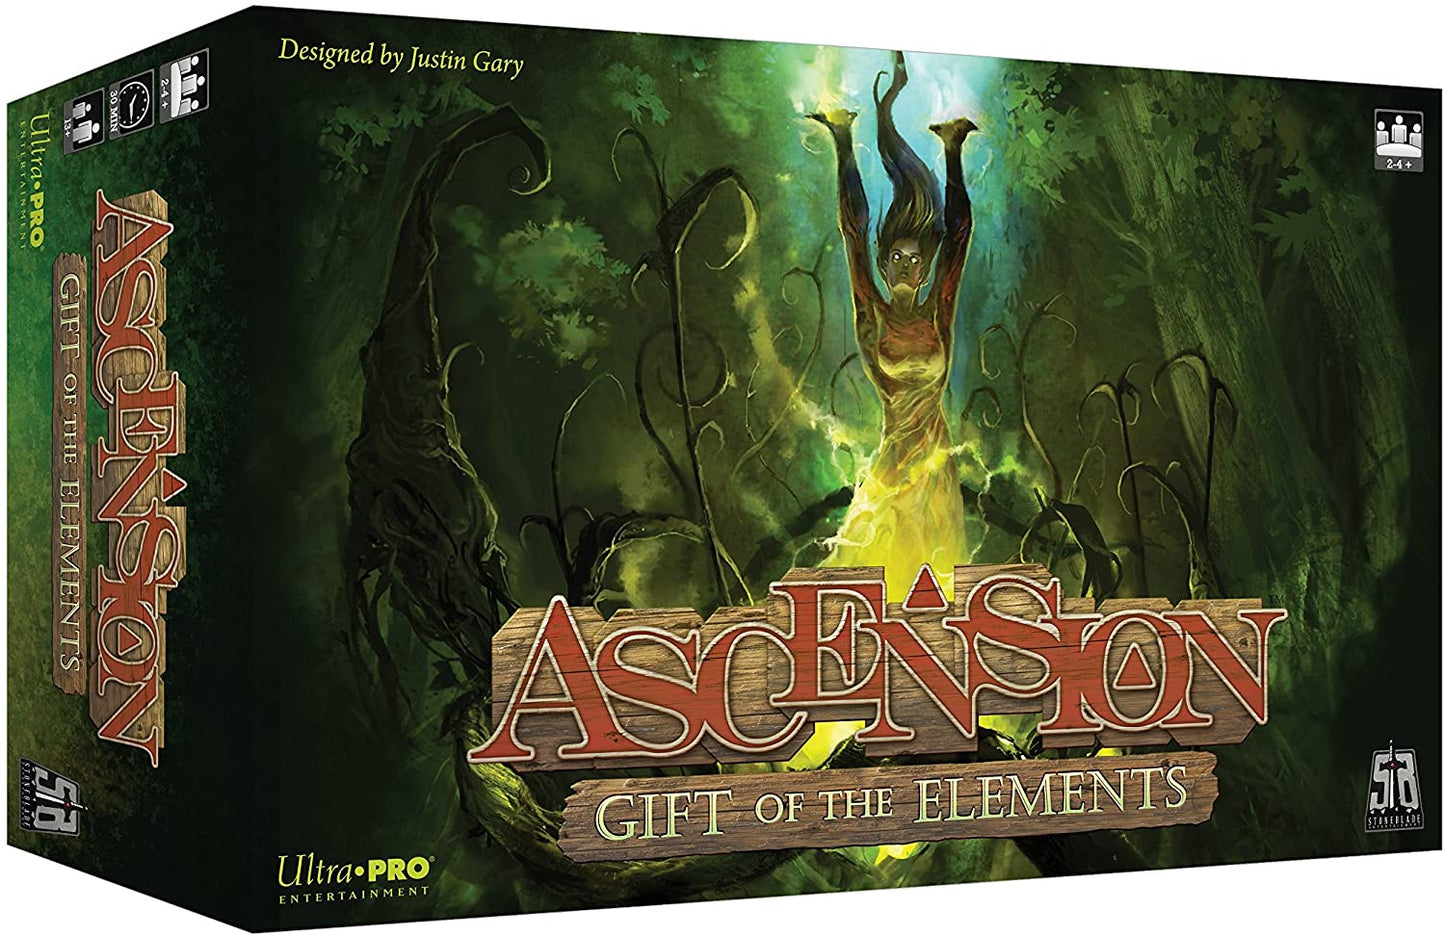 ASCENSION GIFT OF THE ELEMENTS